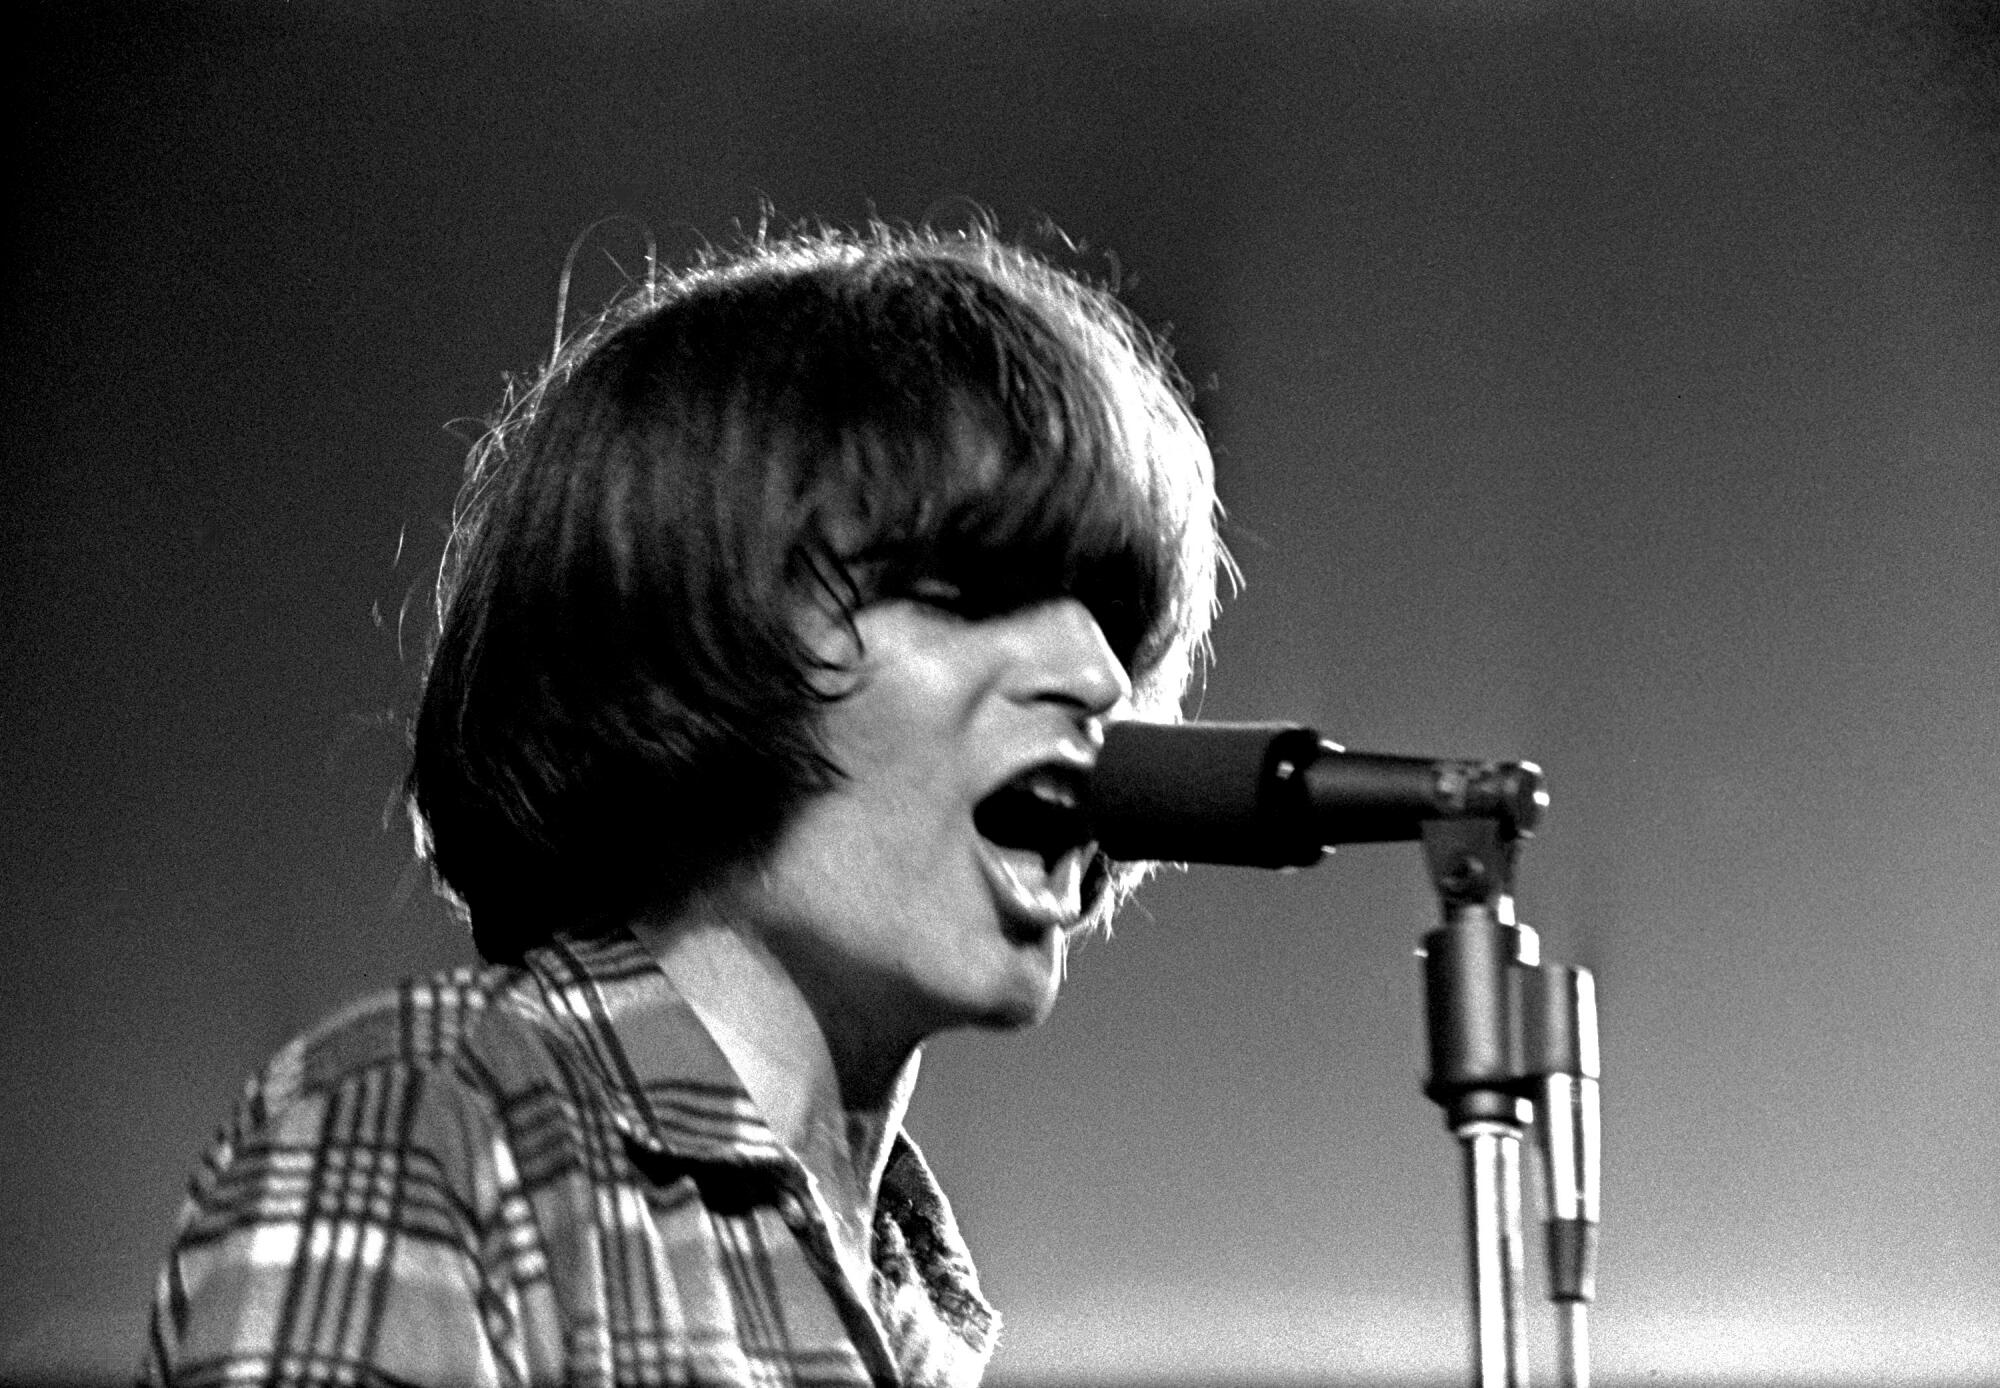 A rock singer in a flannel shirt performing onstage in 1970